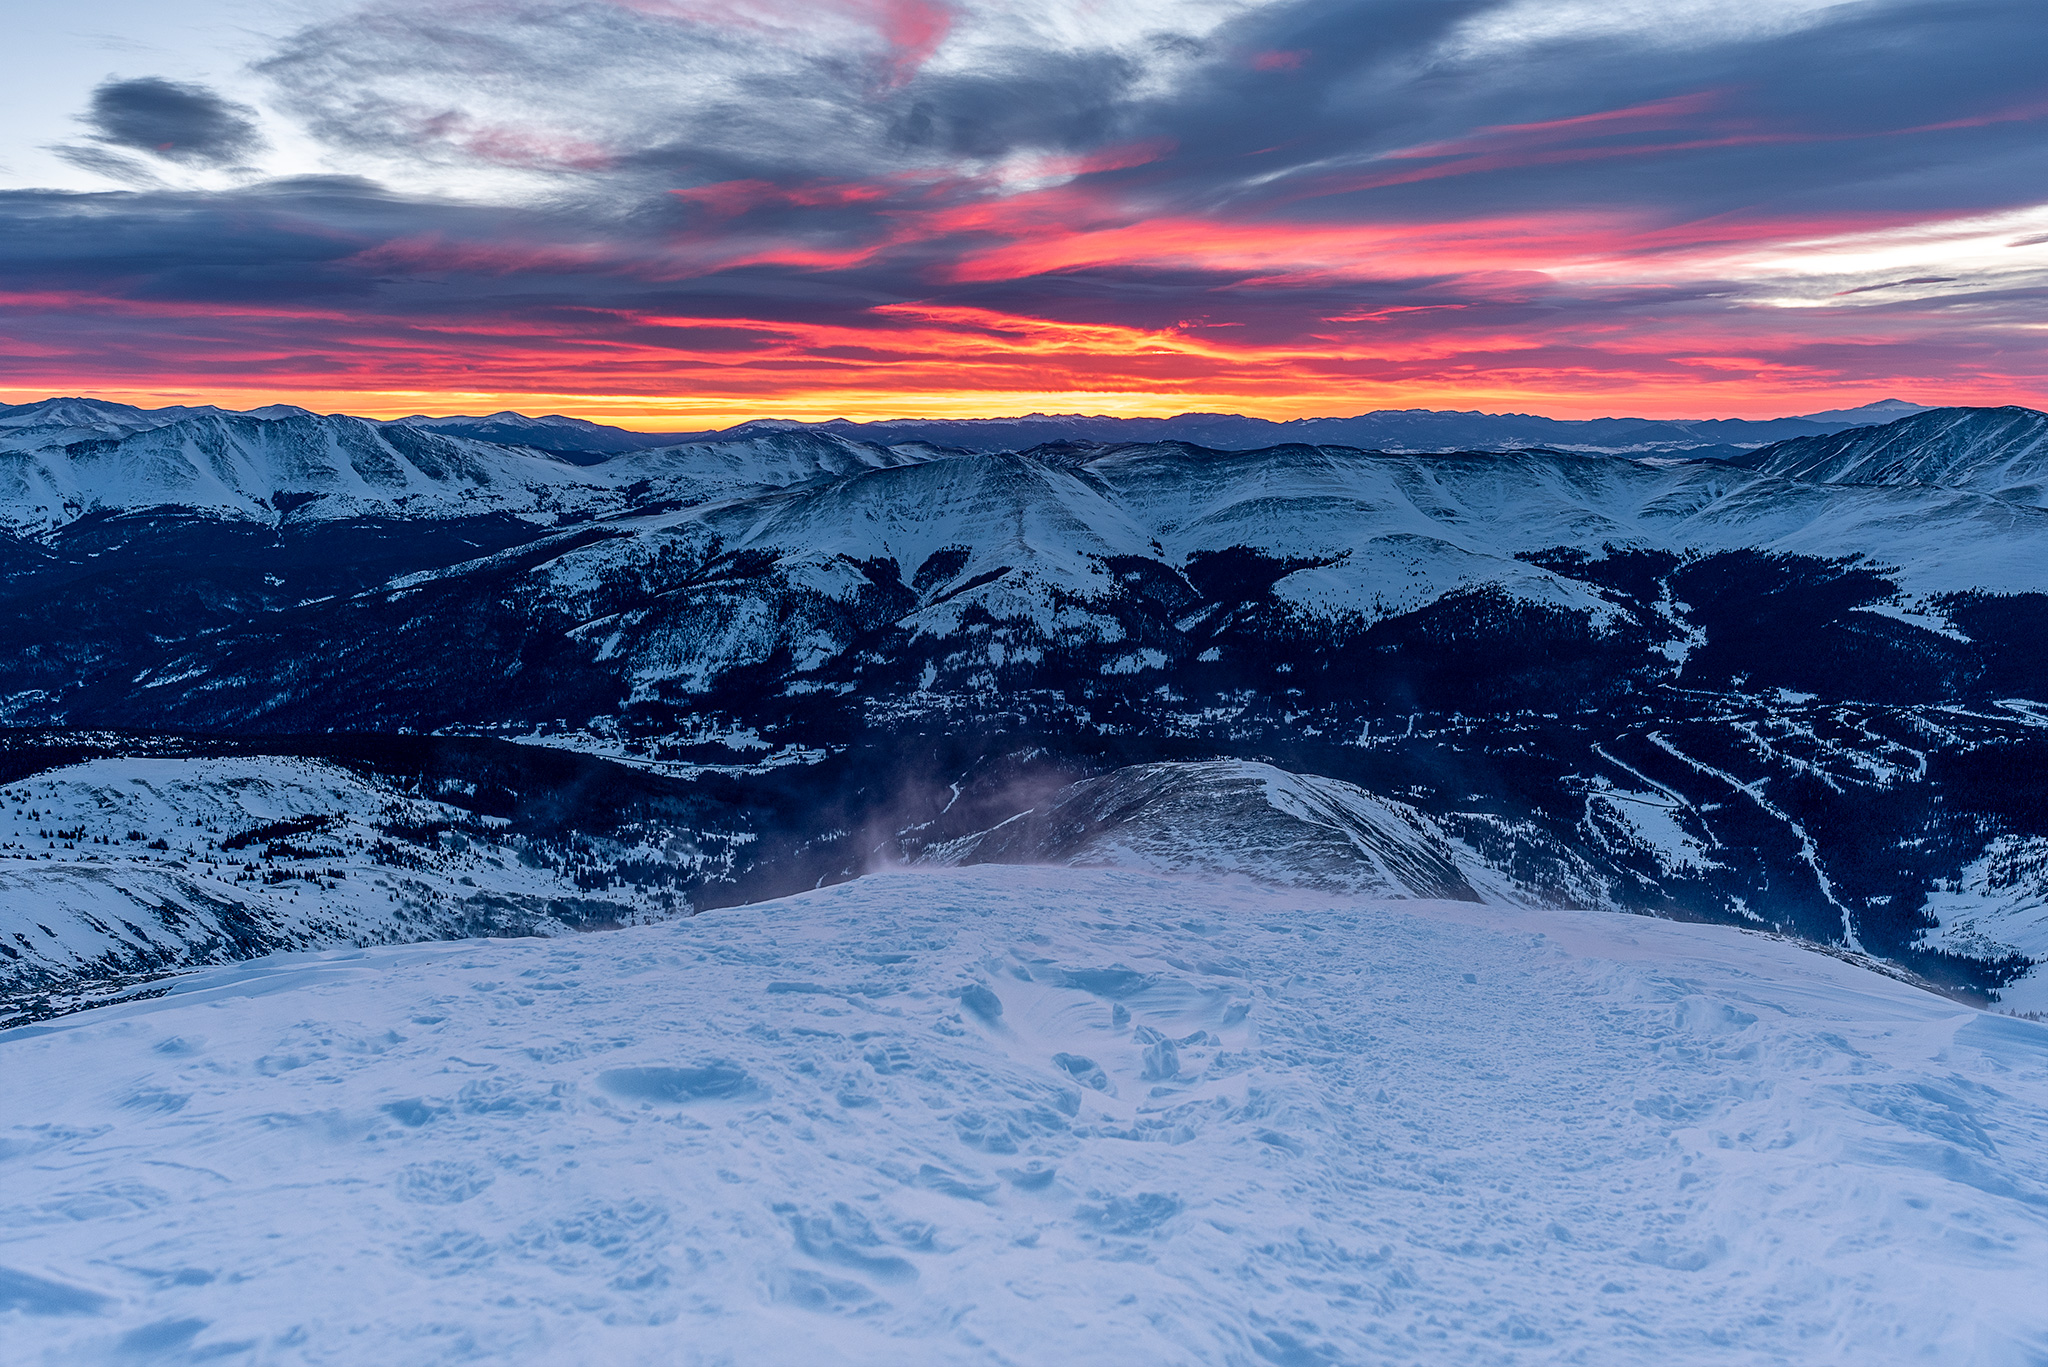 Sunrise from the summit of Quandary Peak in the winter